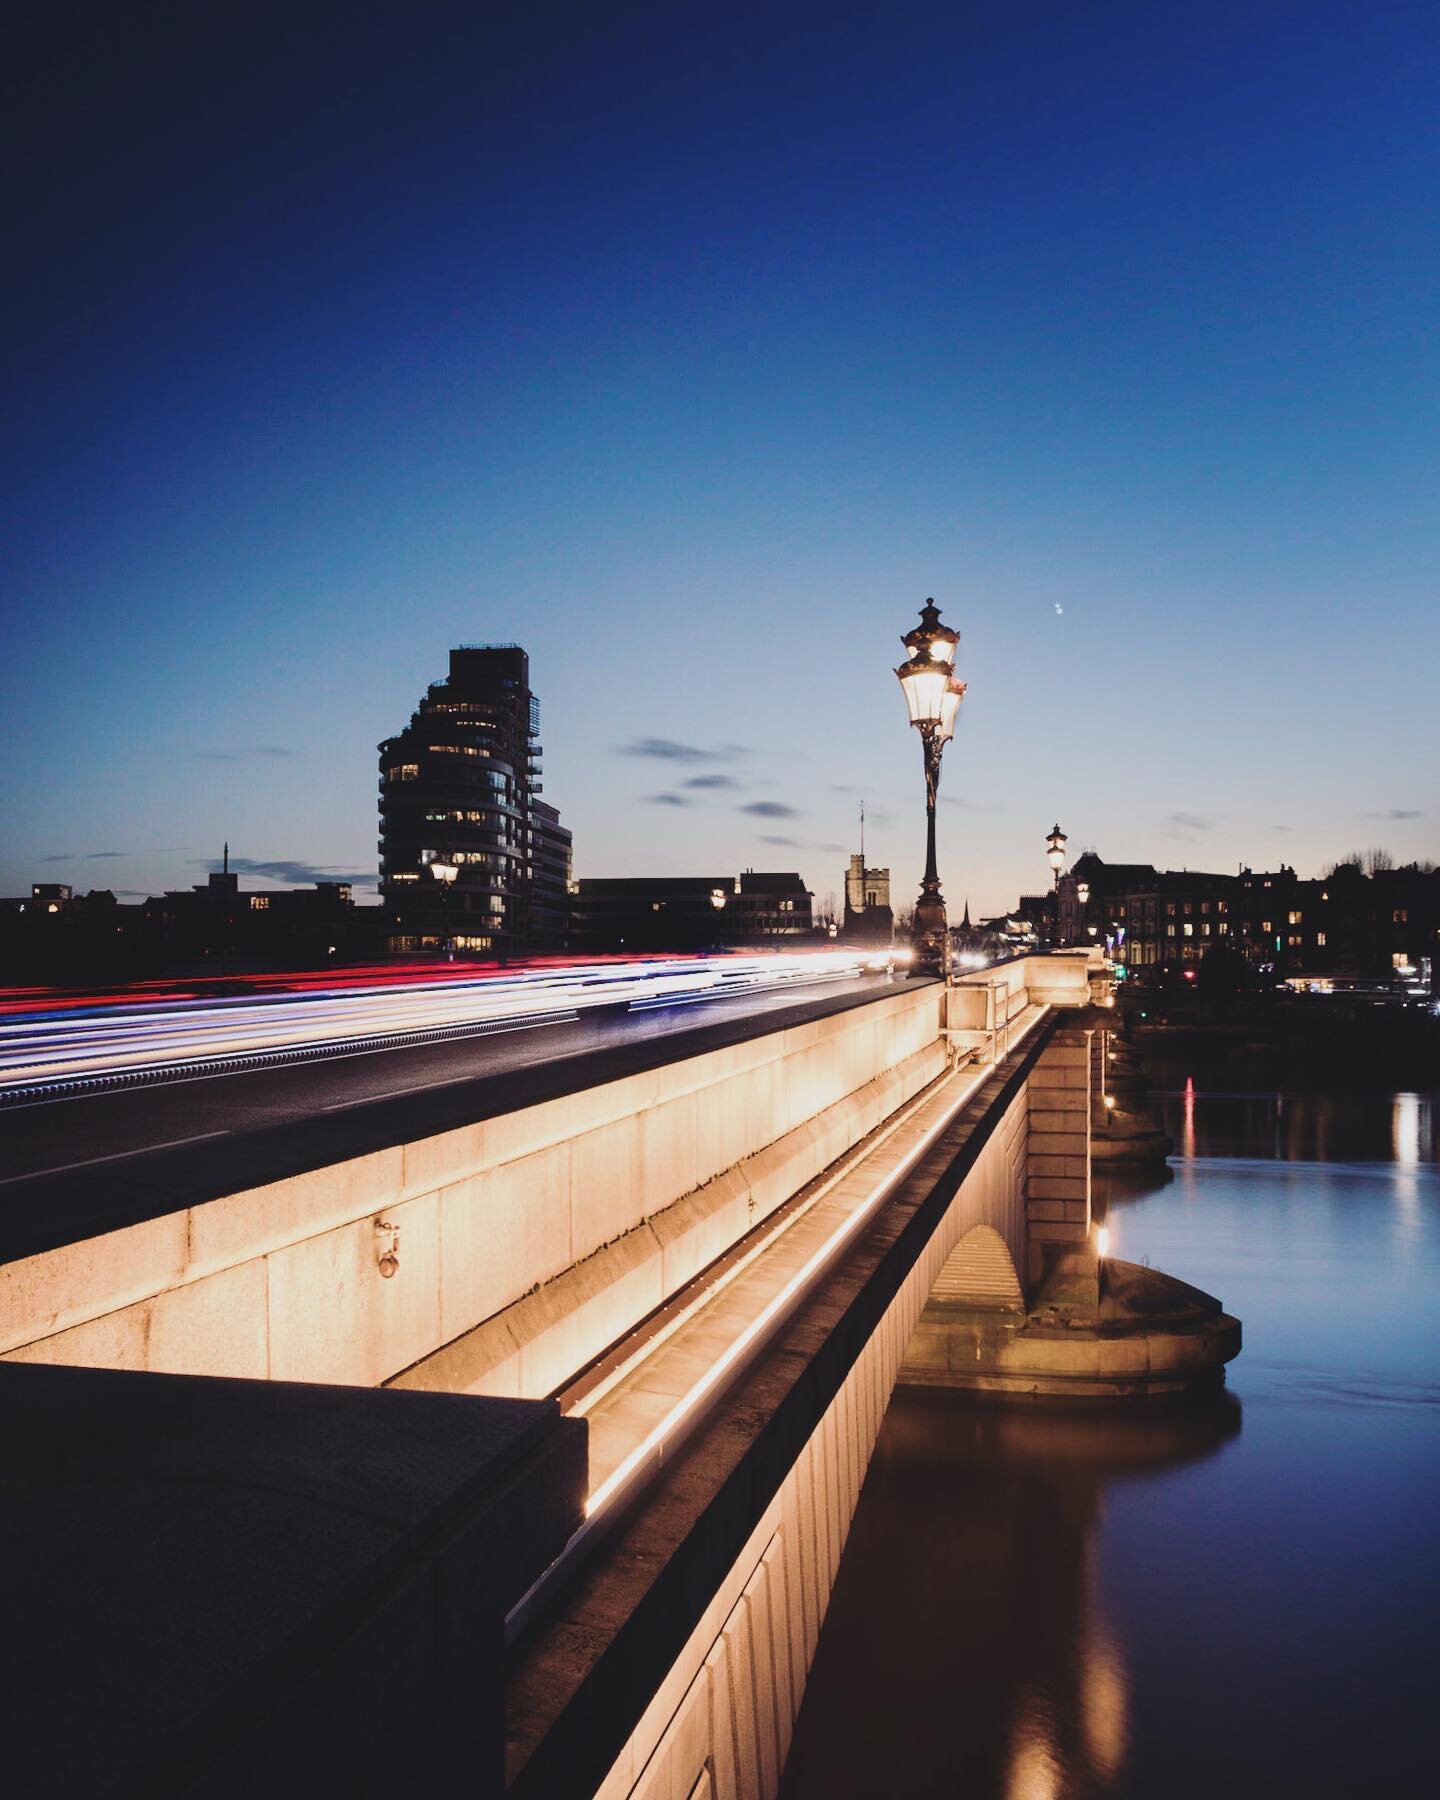 When Stars (or planets) Align 🪐

Last night, having just finished a day&rsquo;s work (shooting PR), I was standing on Putney bridge taking in the last rays of sunlight when a stranger approached me. He saw my camera and asked if I was there to shoot